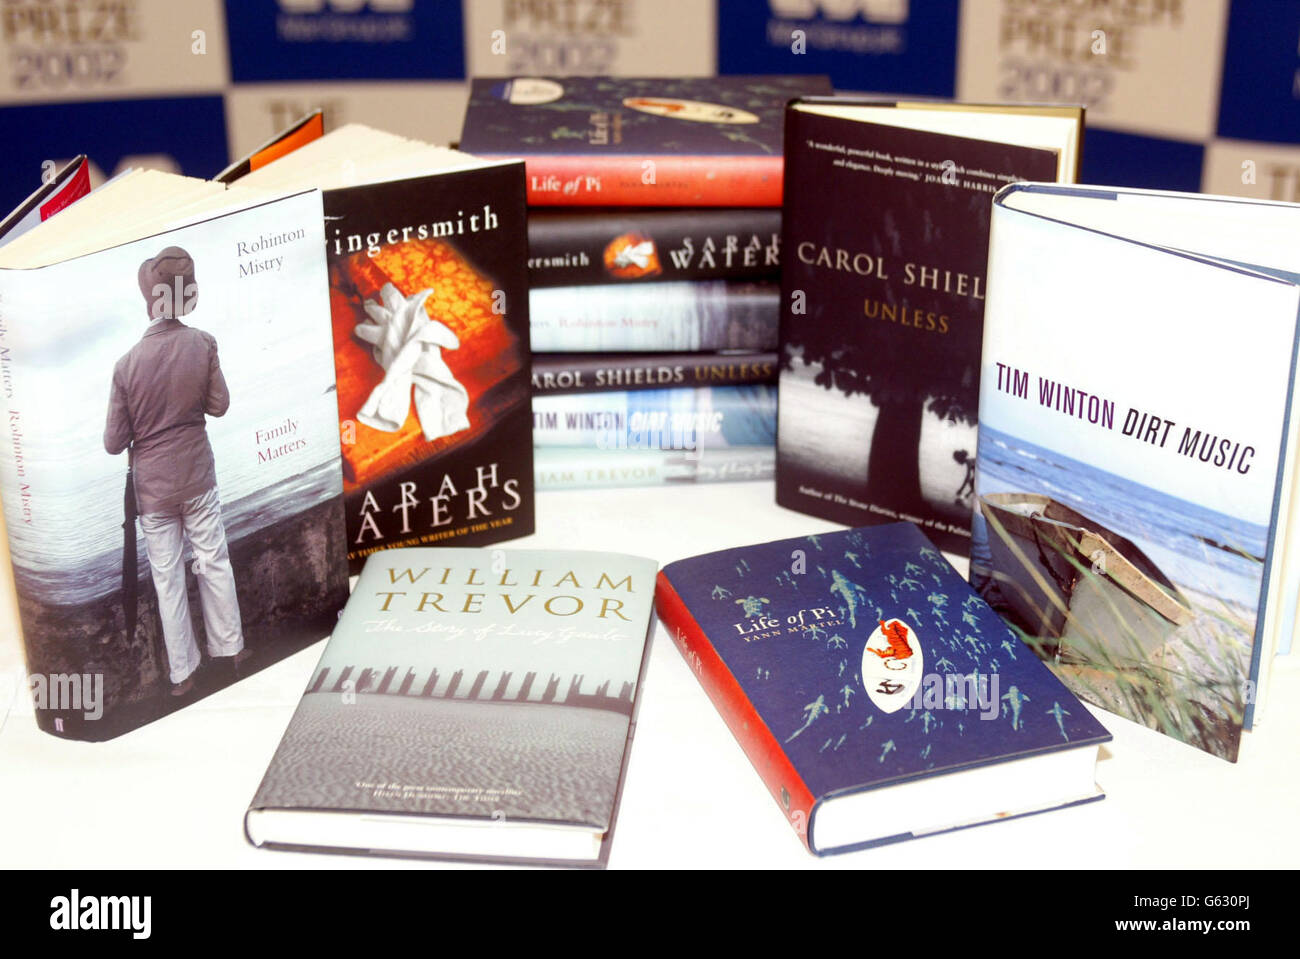 The six shortlisted books for the Man Booker Prize, which were announced at a press conference near Tower Bridge in London. Stock Photo